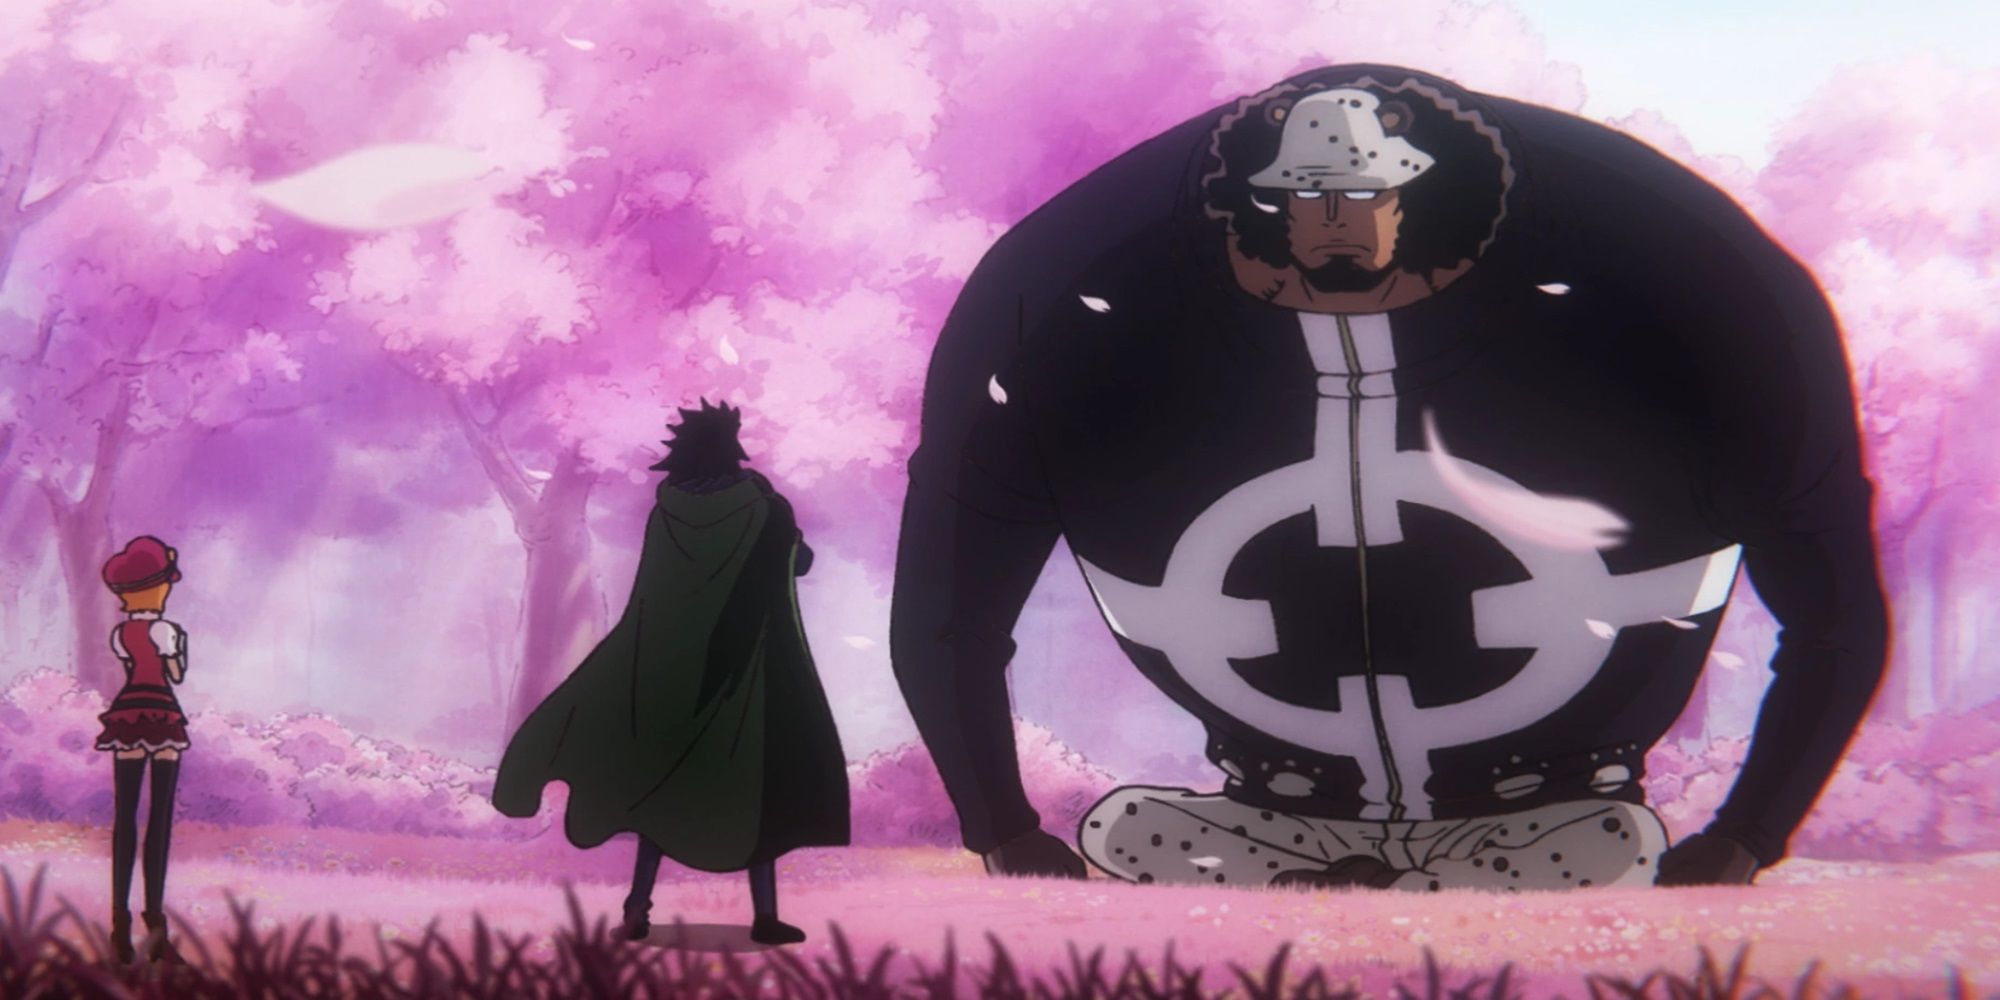 Kuma on his knees in front of Dragon and Koala in episode 1088 at Kamabakka kingdom surrounded by cherry blossom trees